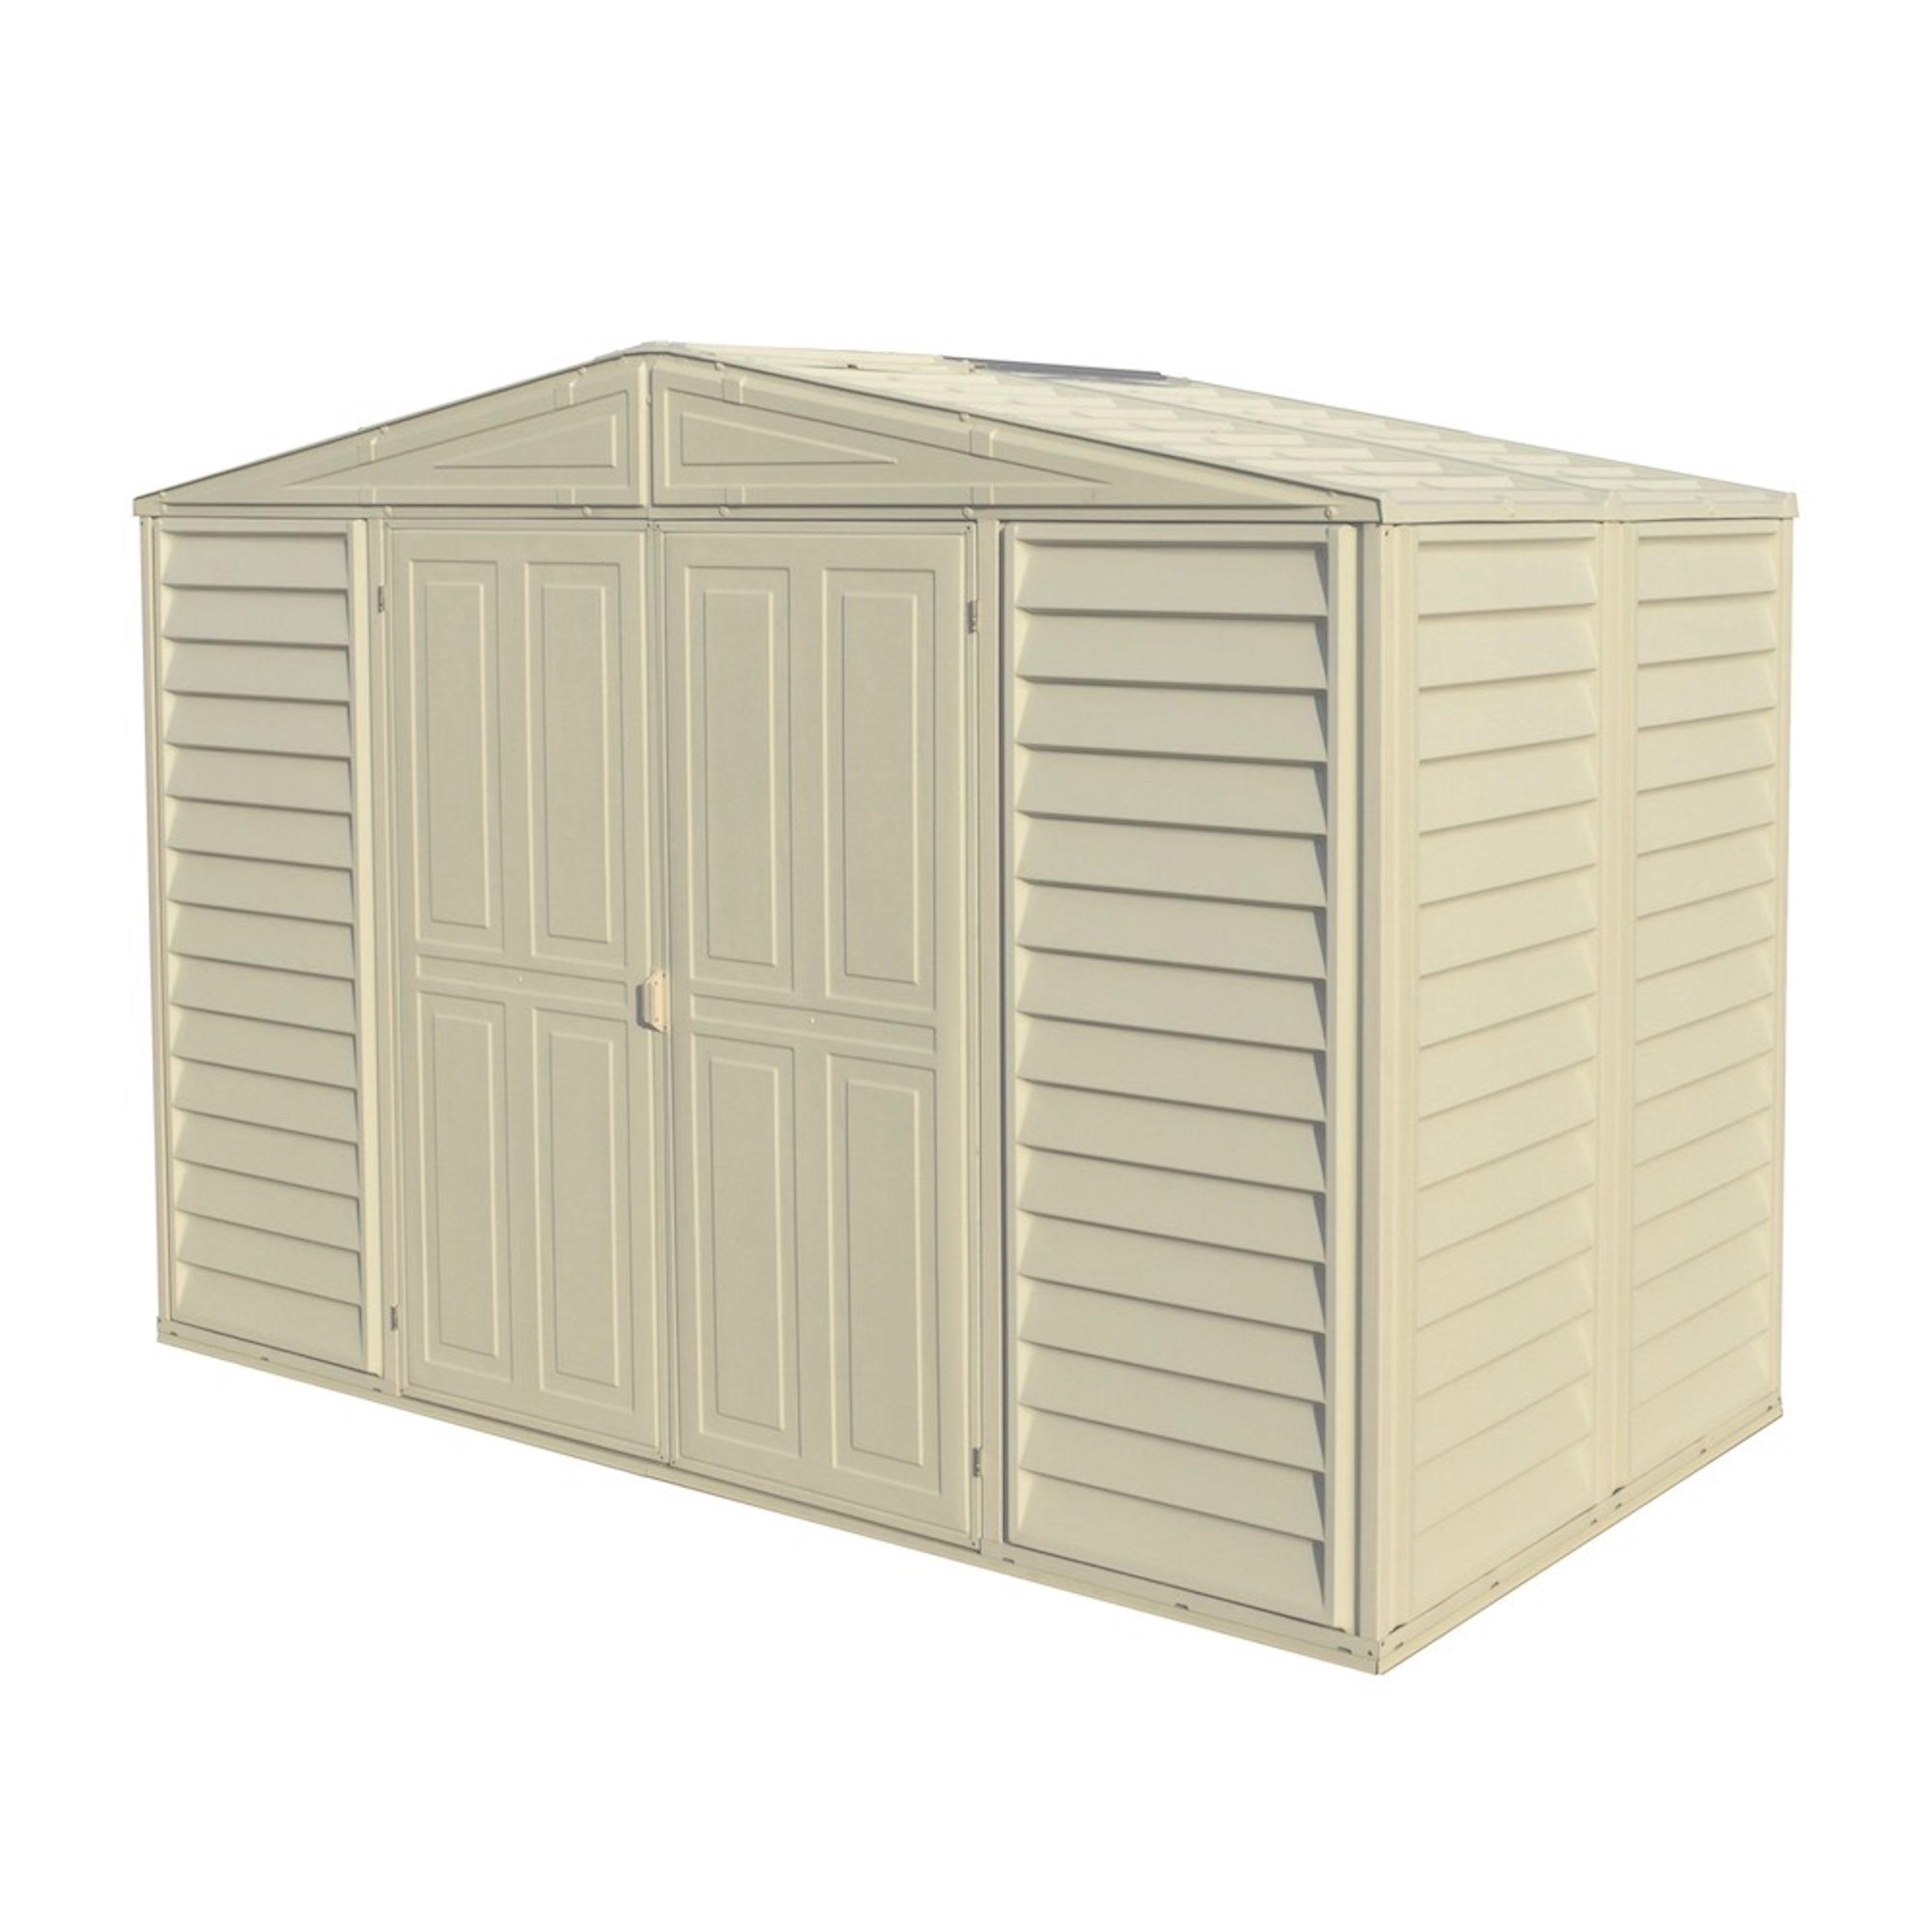 DuraMax Building Products 10-ft x 5-ft Woodbridge Gable Vinyl Storage Shed  in the Vinyl & Resin Storage Sheds department at Lowes.com